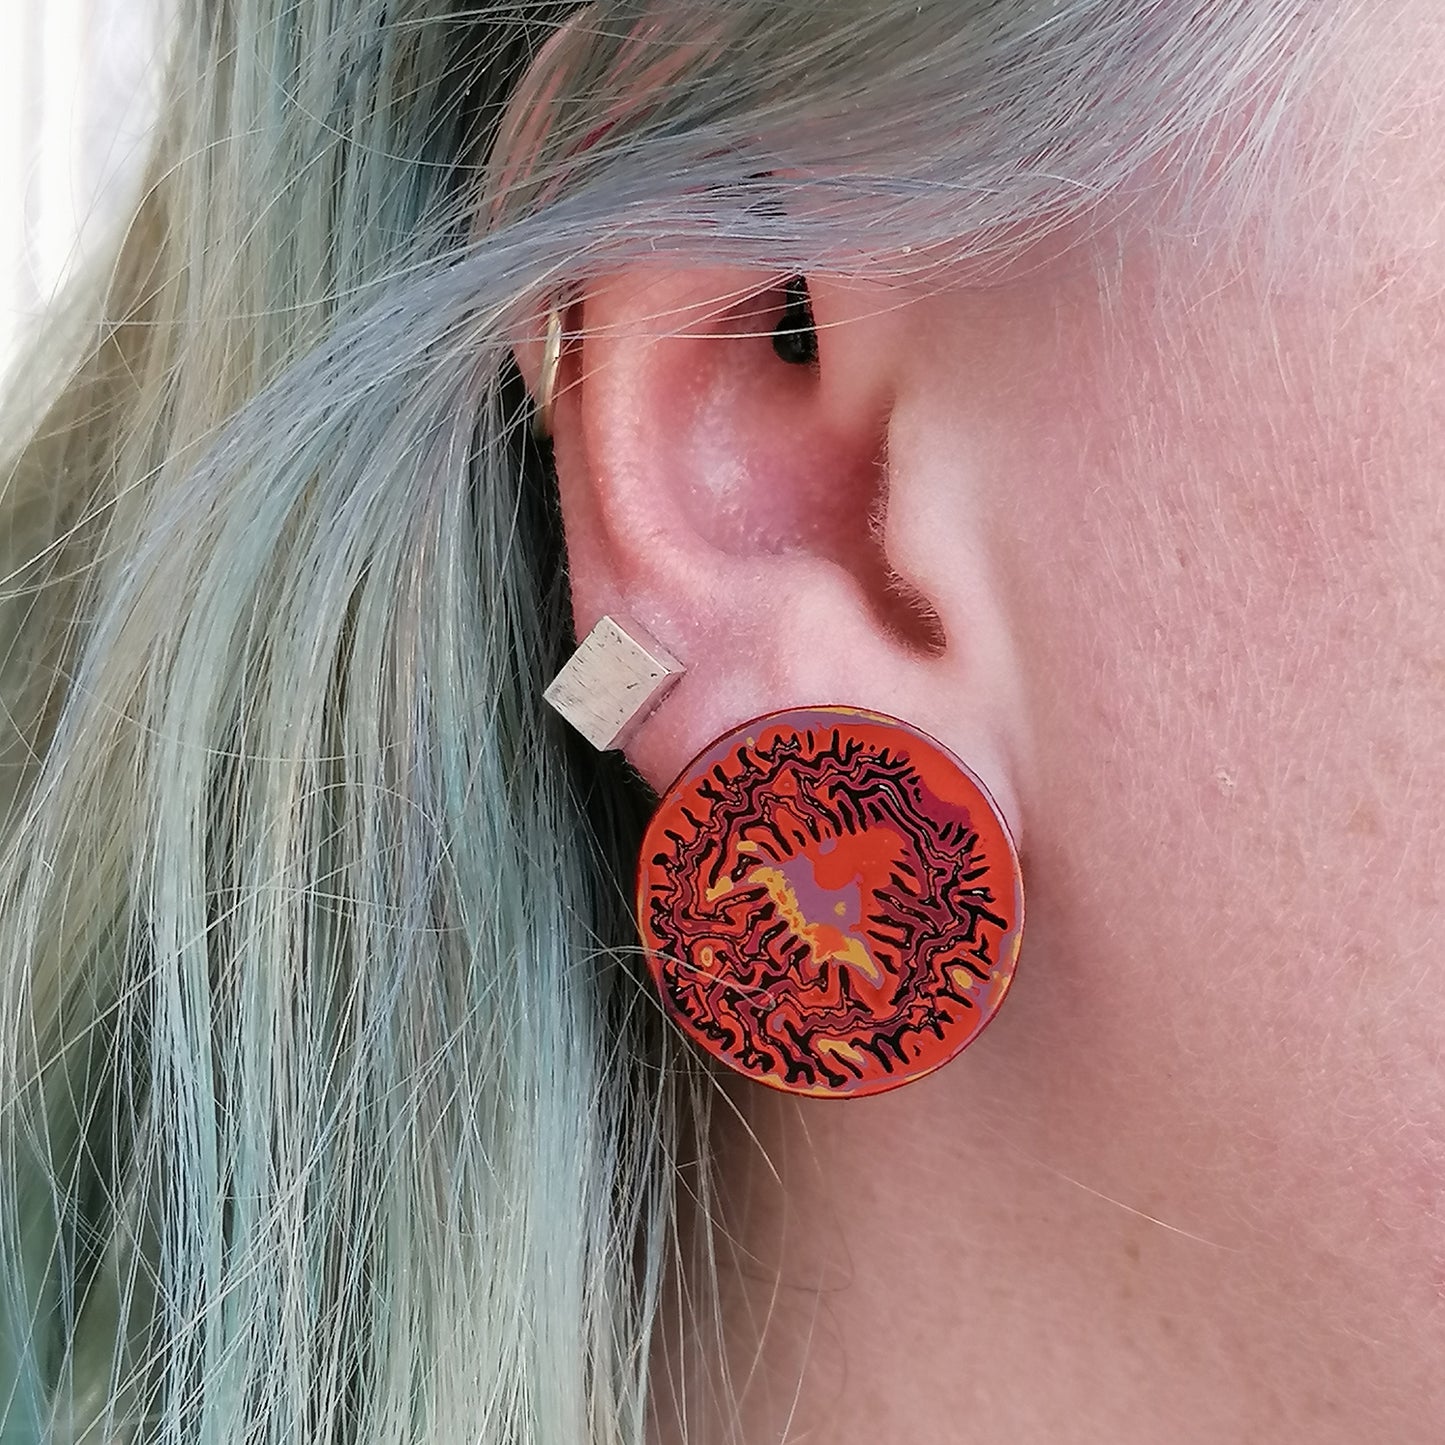 Image shows a single earring being worn by a model with blue hair. Shiney and slick with a wrinkled pattern in orange, pink, yellow and liliac